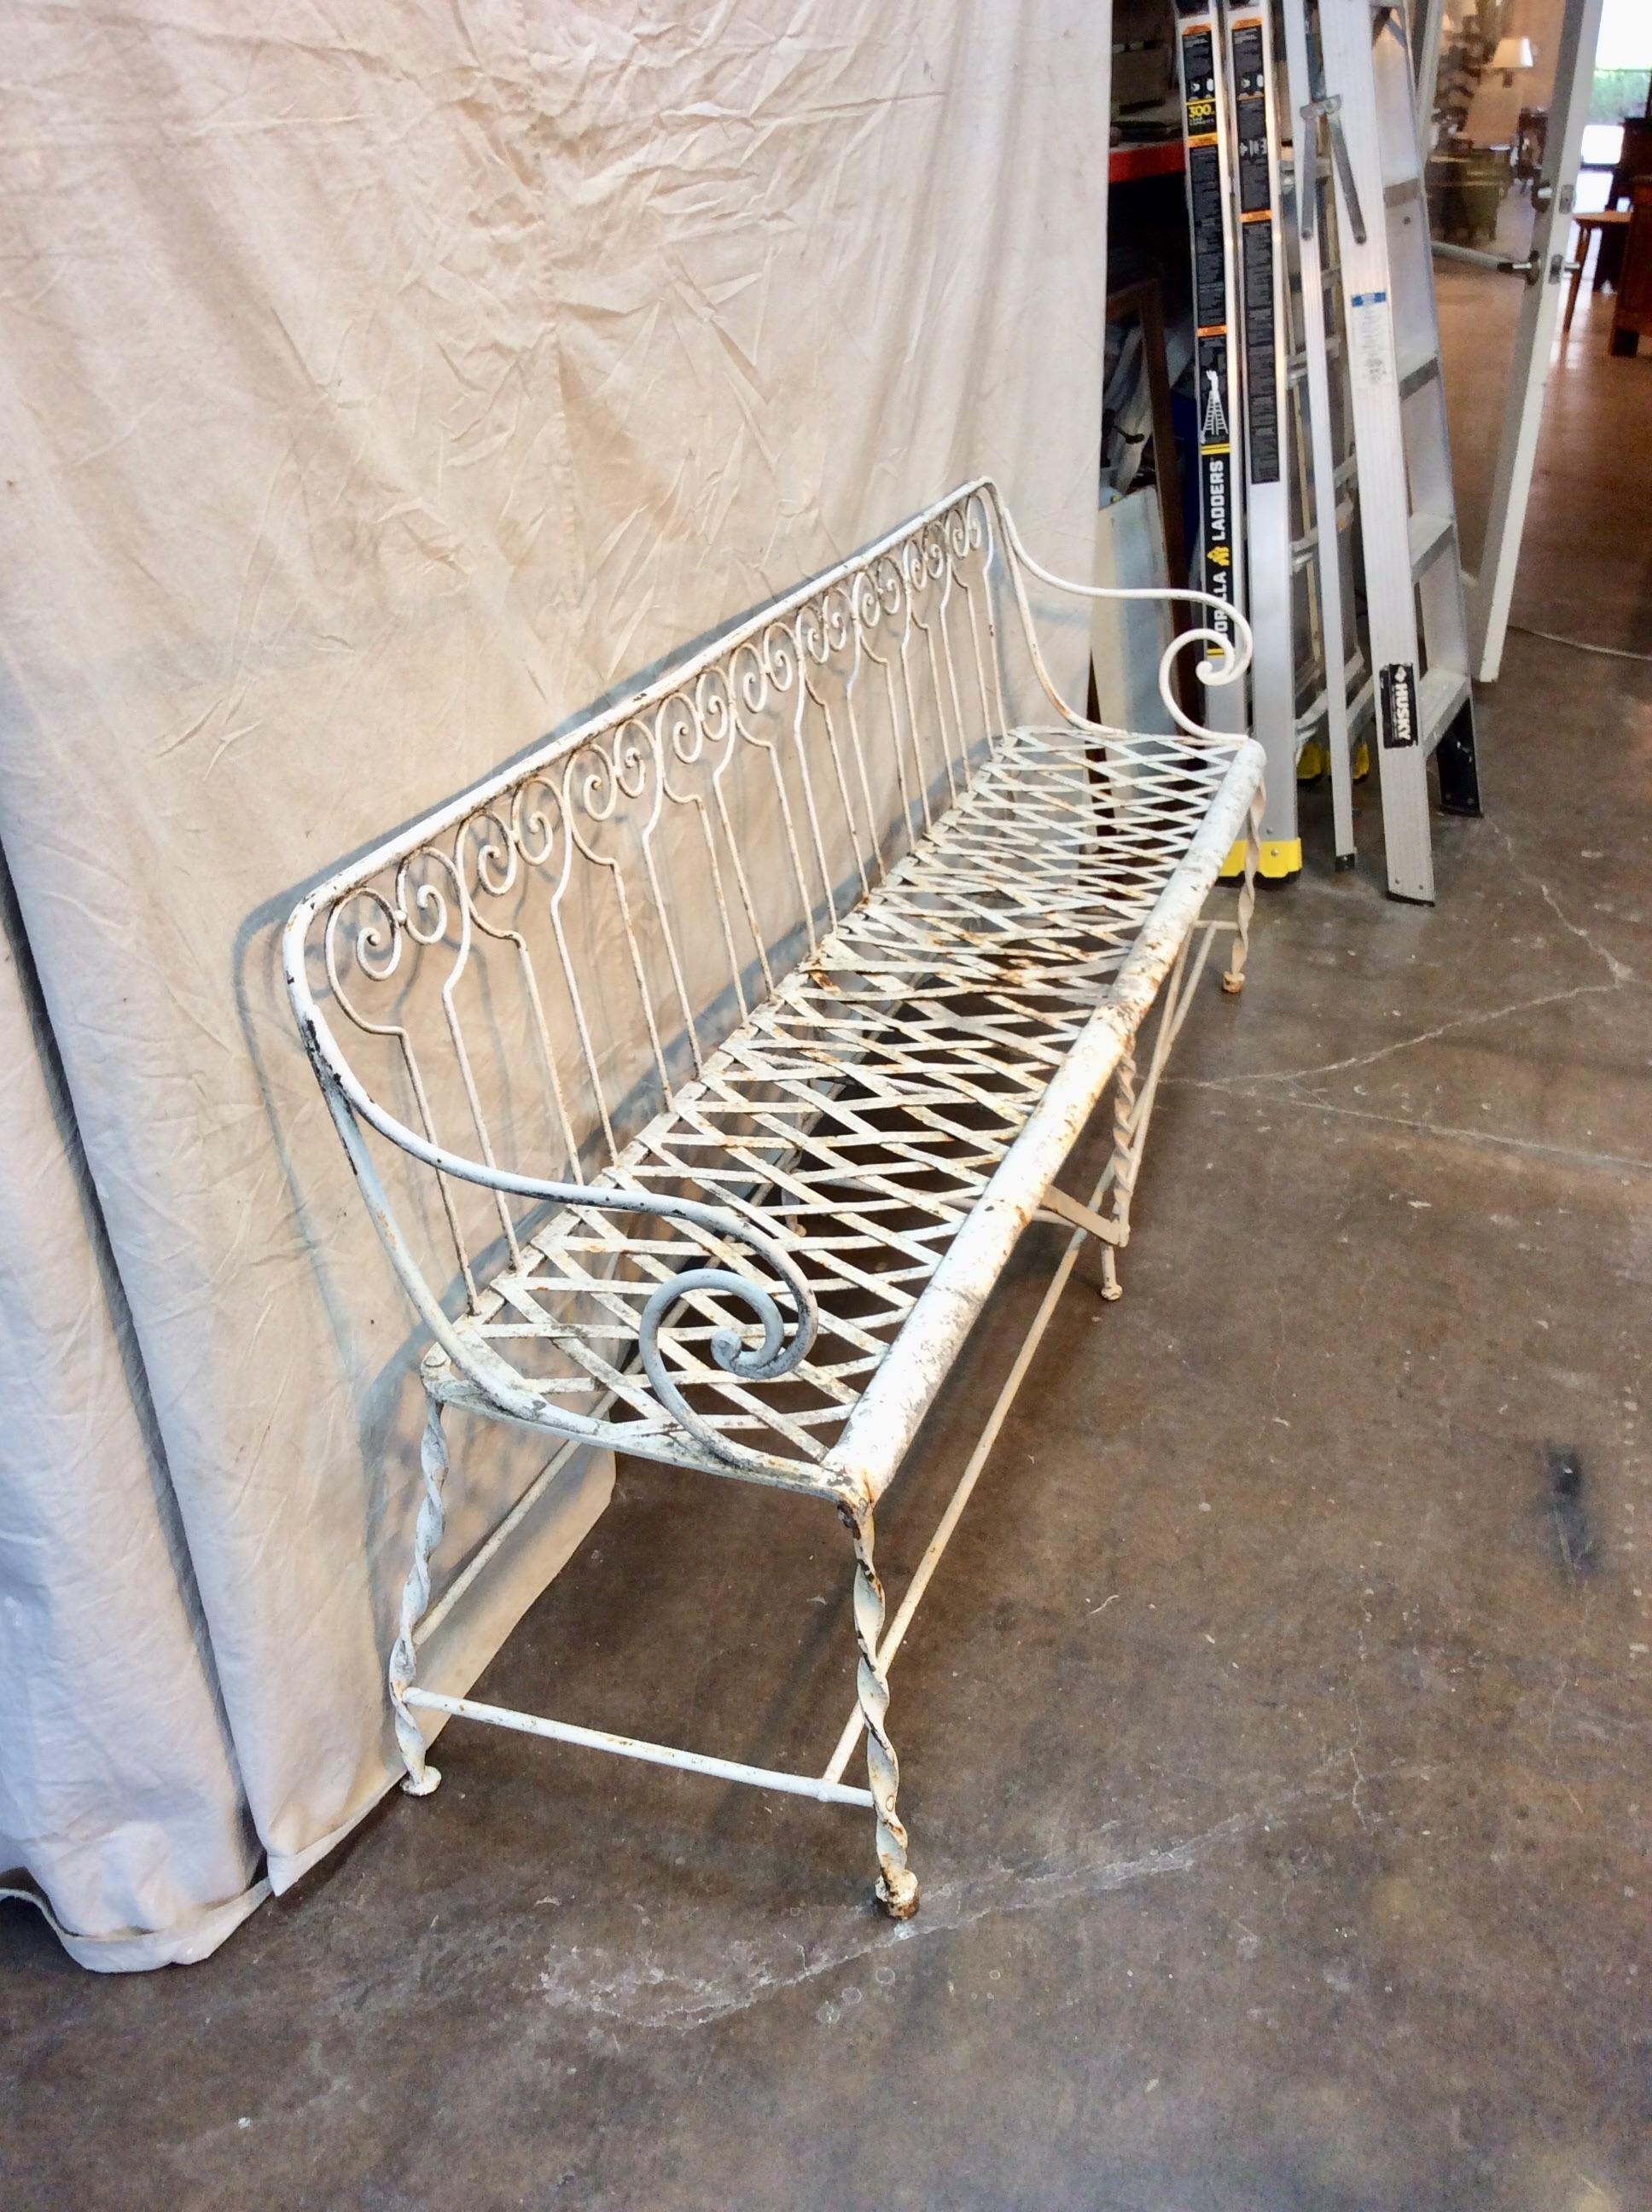 Found in the South of France, this attractive Late 19th century French Hand Forged Iron Garden Bench or Settee features a lattice flat iron seat with a scrolled iron back, arms and legs. The piece is supported with iron stretchers and crossbars.